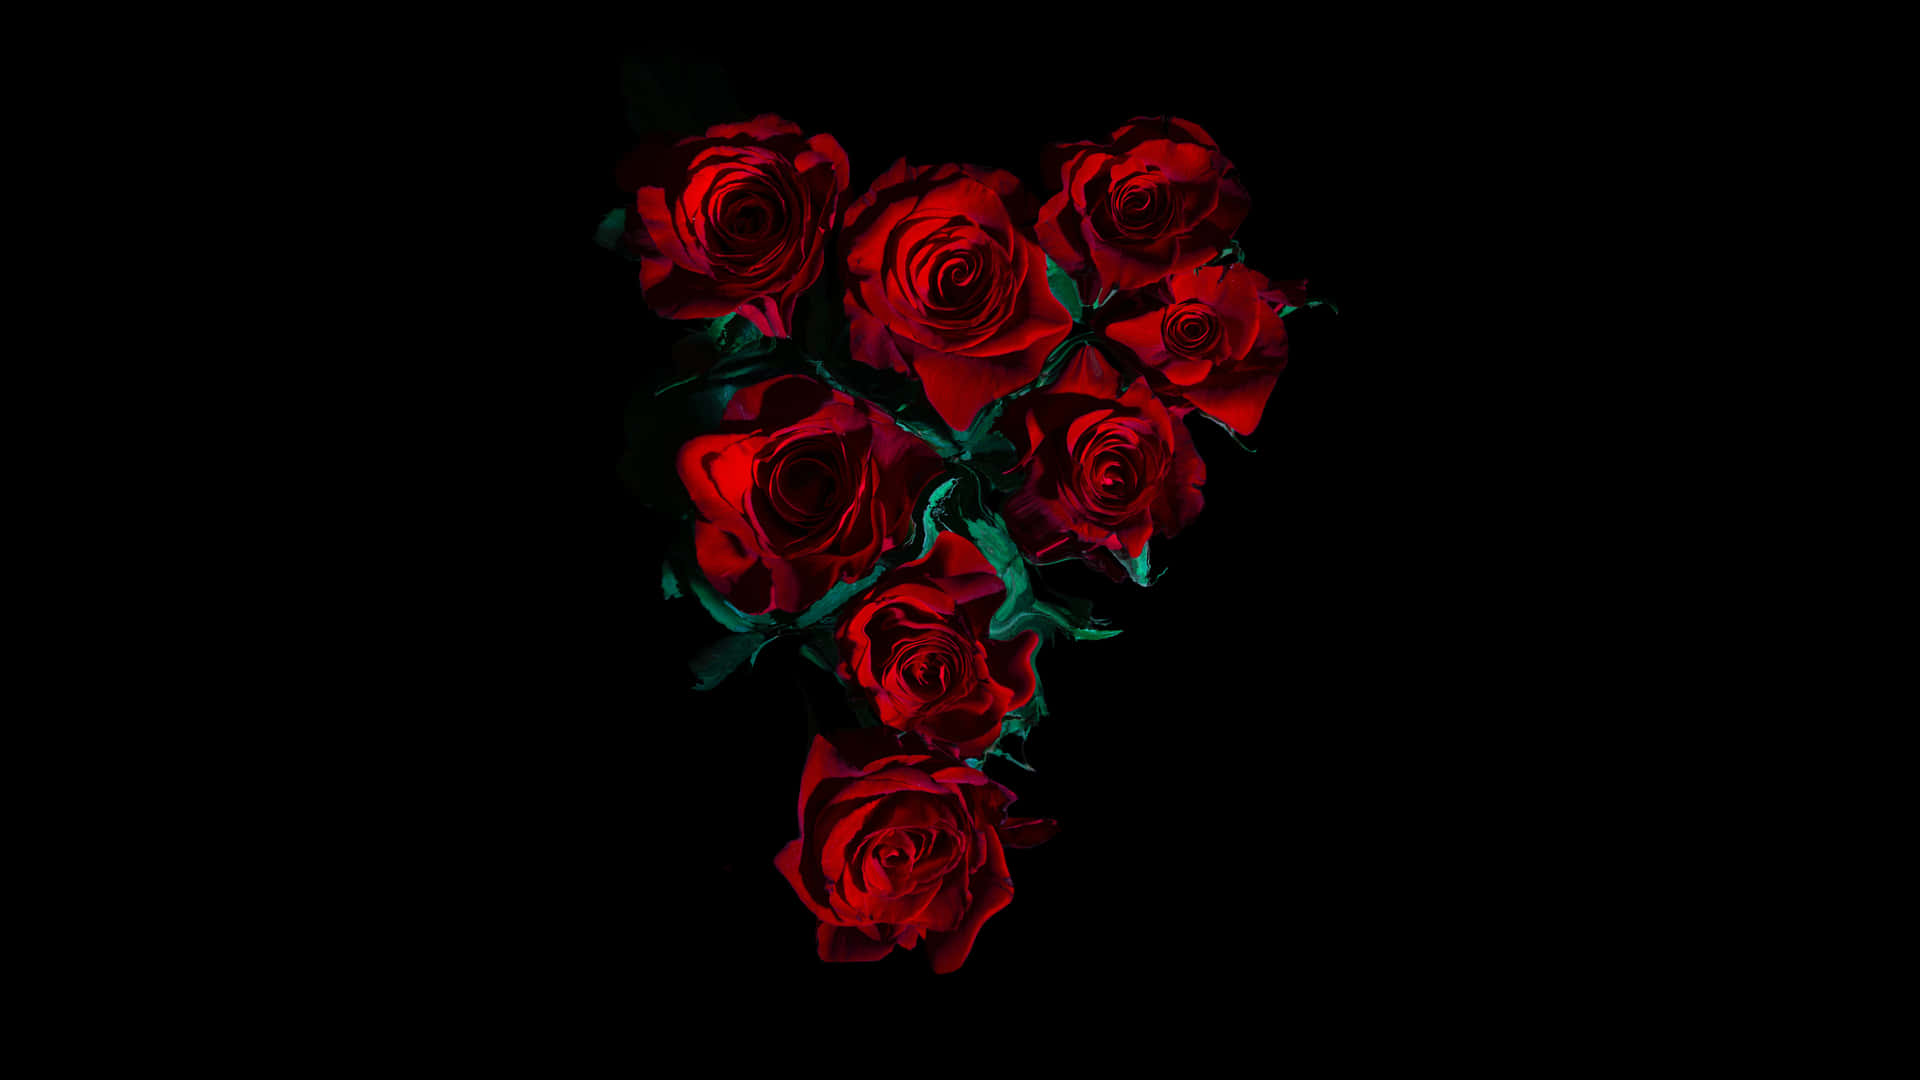 A Black Background With Red Roses On It Wallpaper